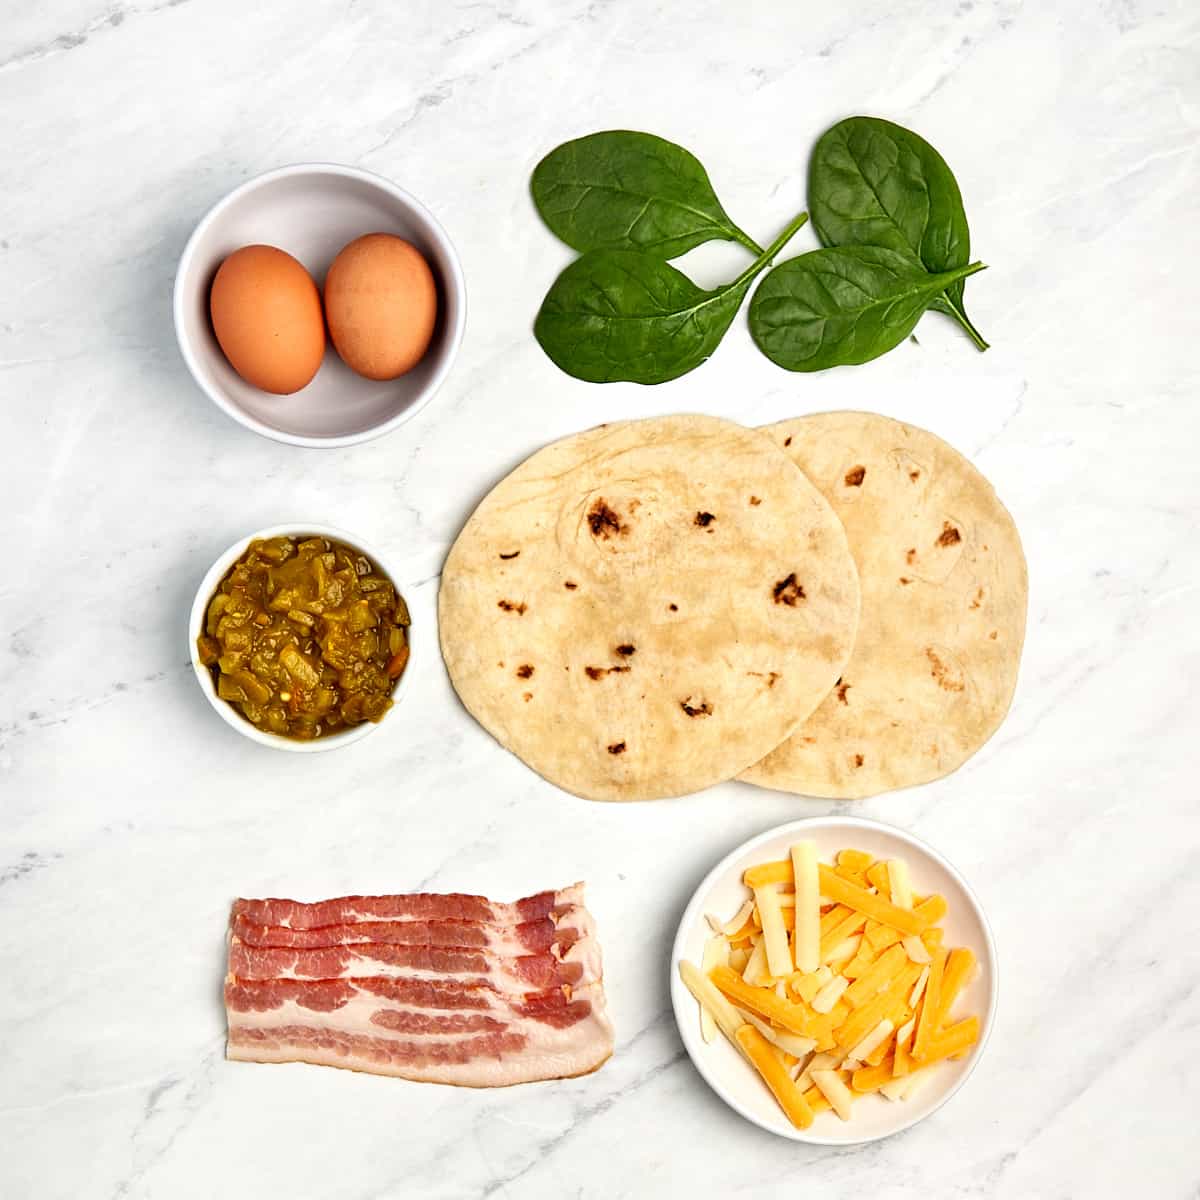 ingredients for breakfast quesadilla with bacon and spinach